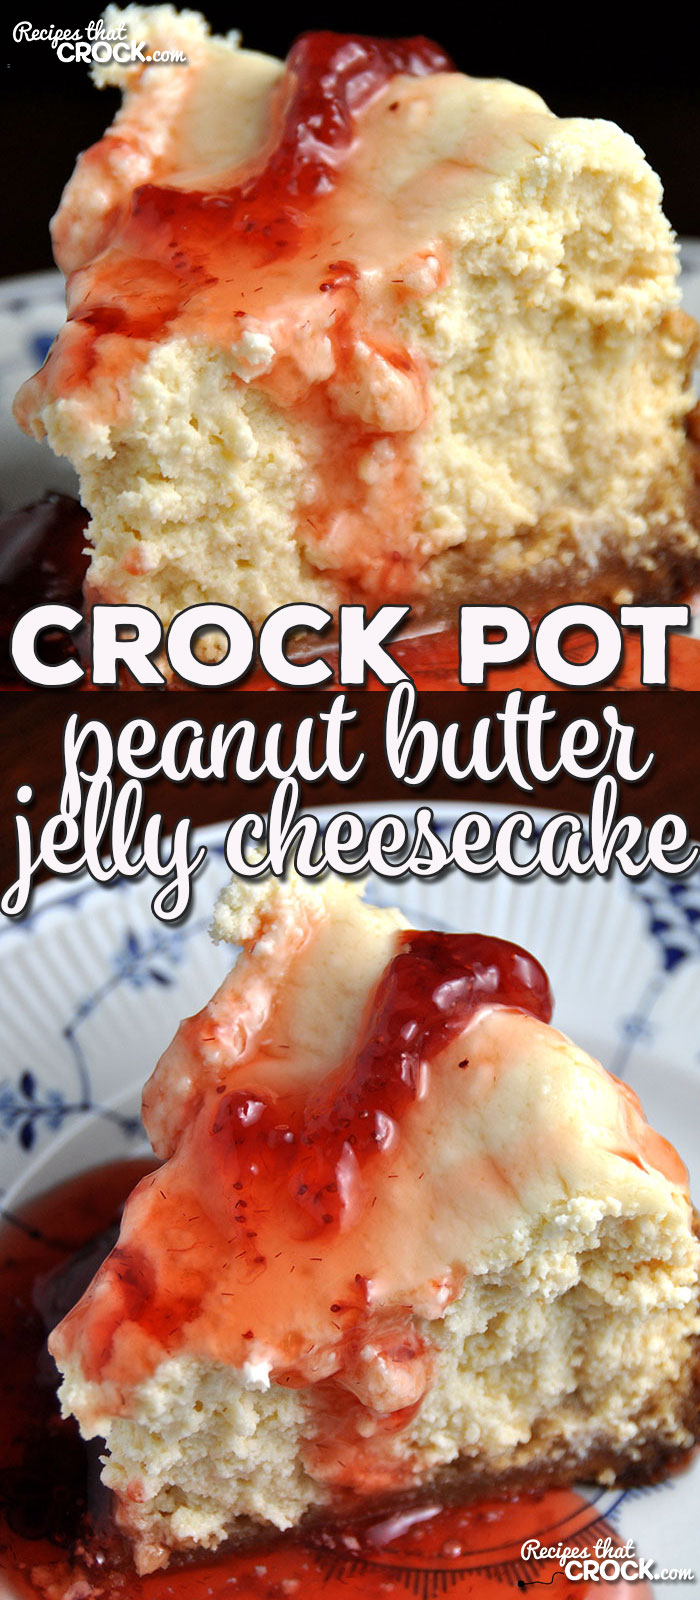 Do I have a treat for you! This Crock Pot Peanut Butter Jelly Cheesecake has a peanut butter cookie crust with a delicious jelly topping!